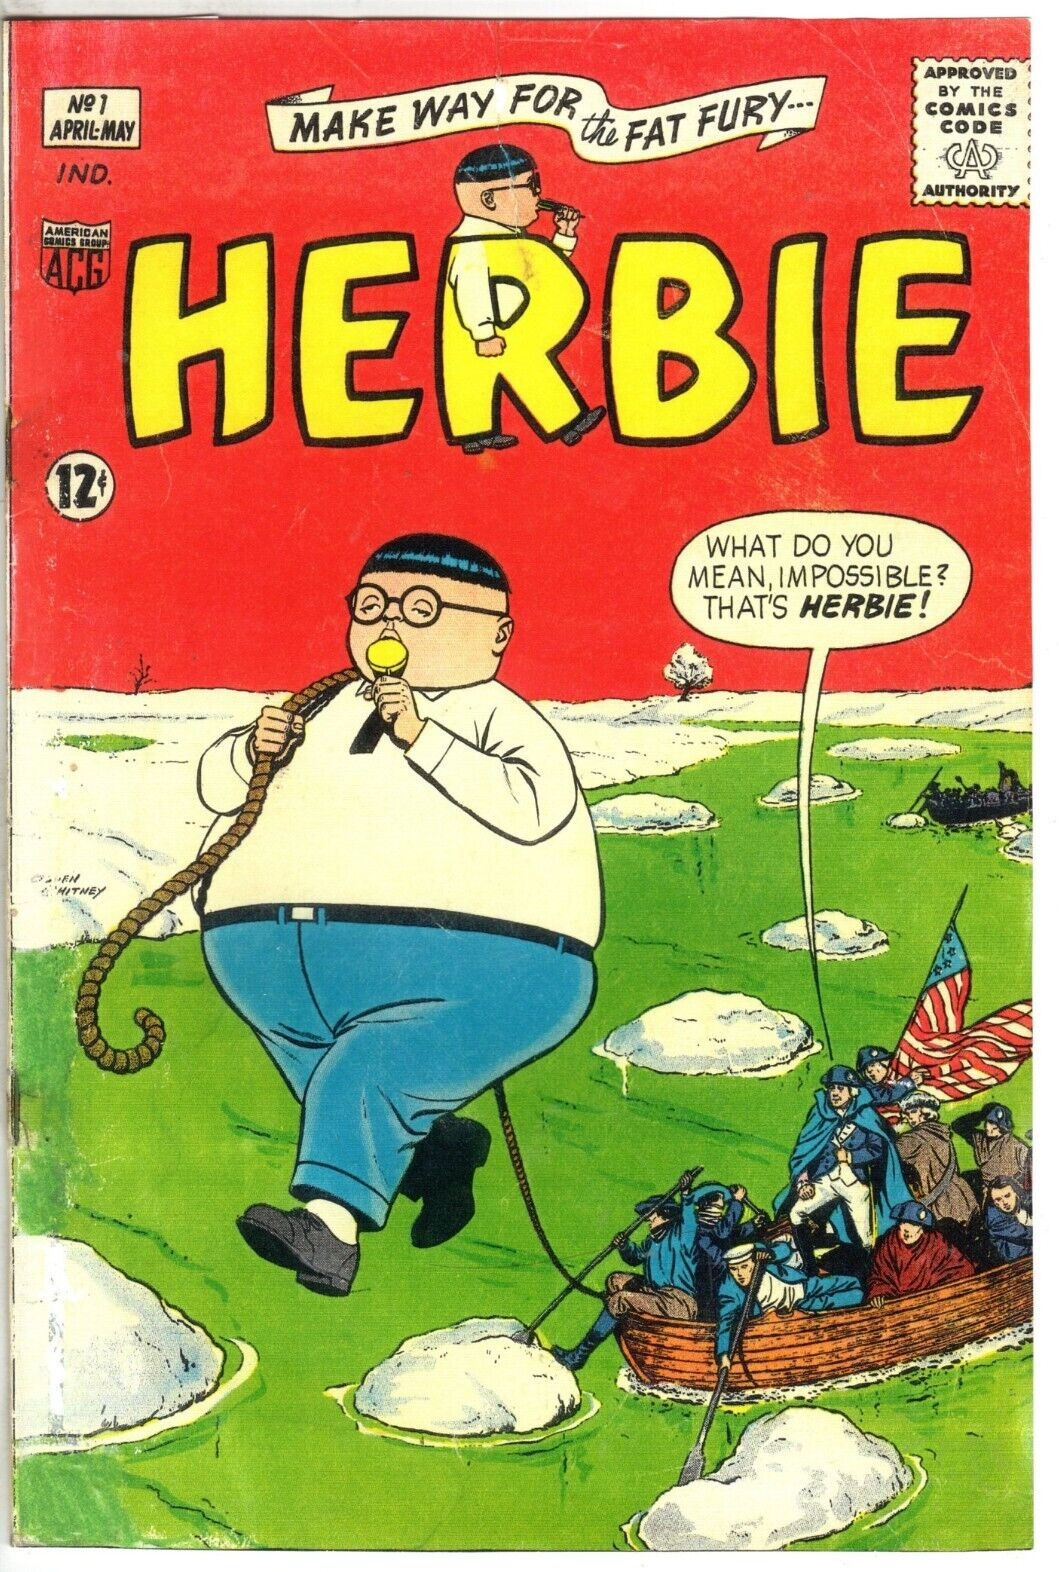 Herbie #1 - Coverless with Facsimile Cover, Excellent Condition